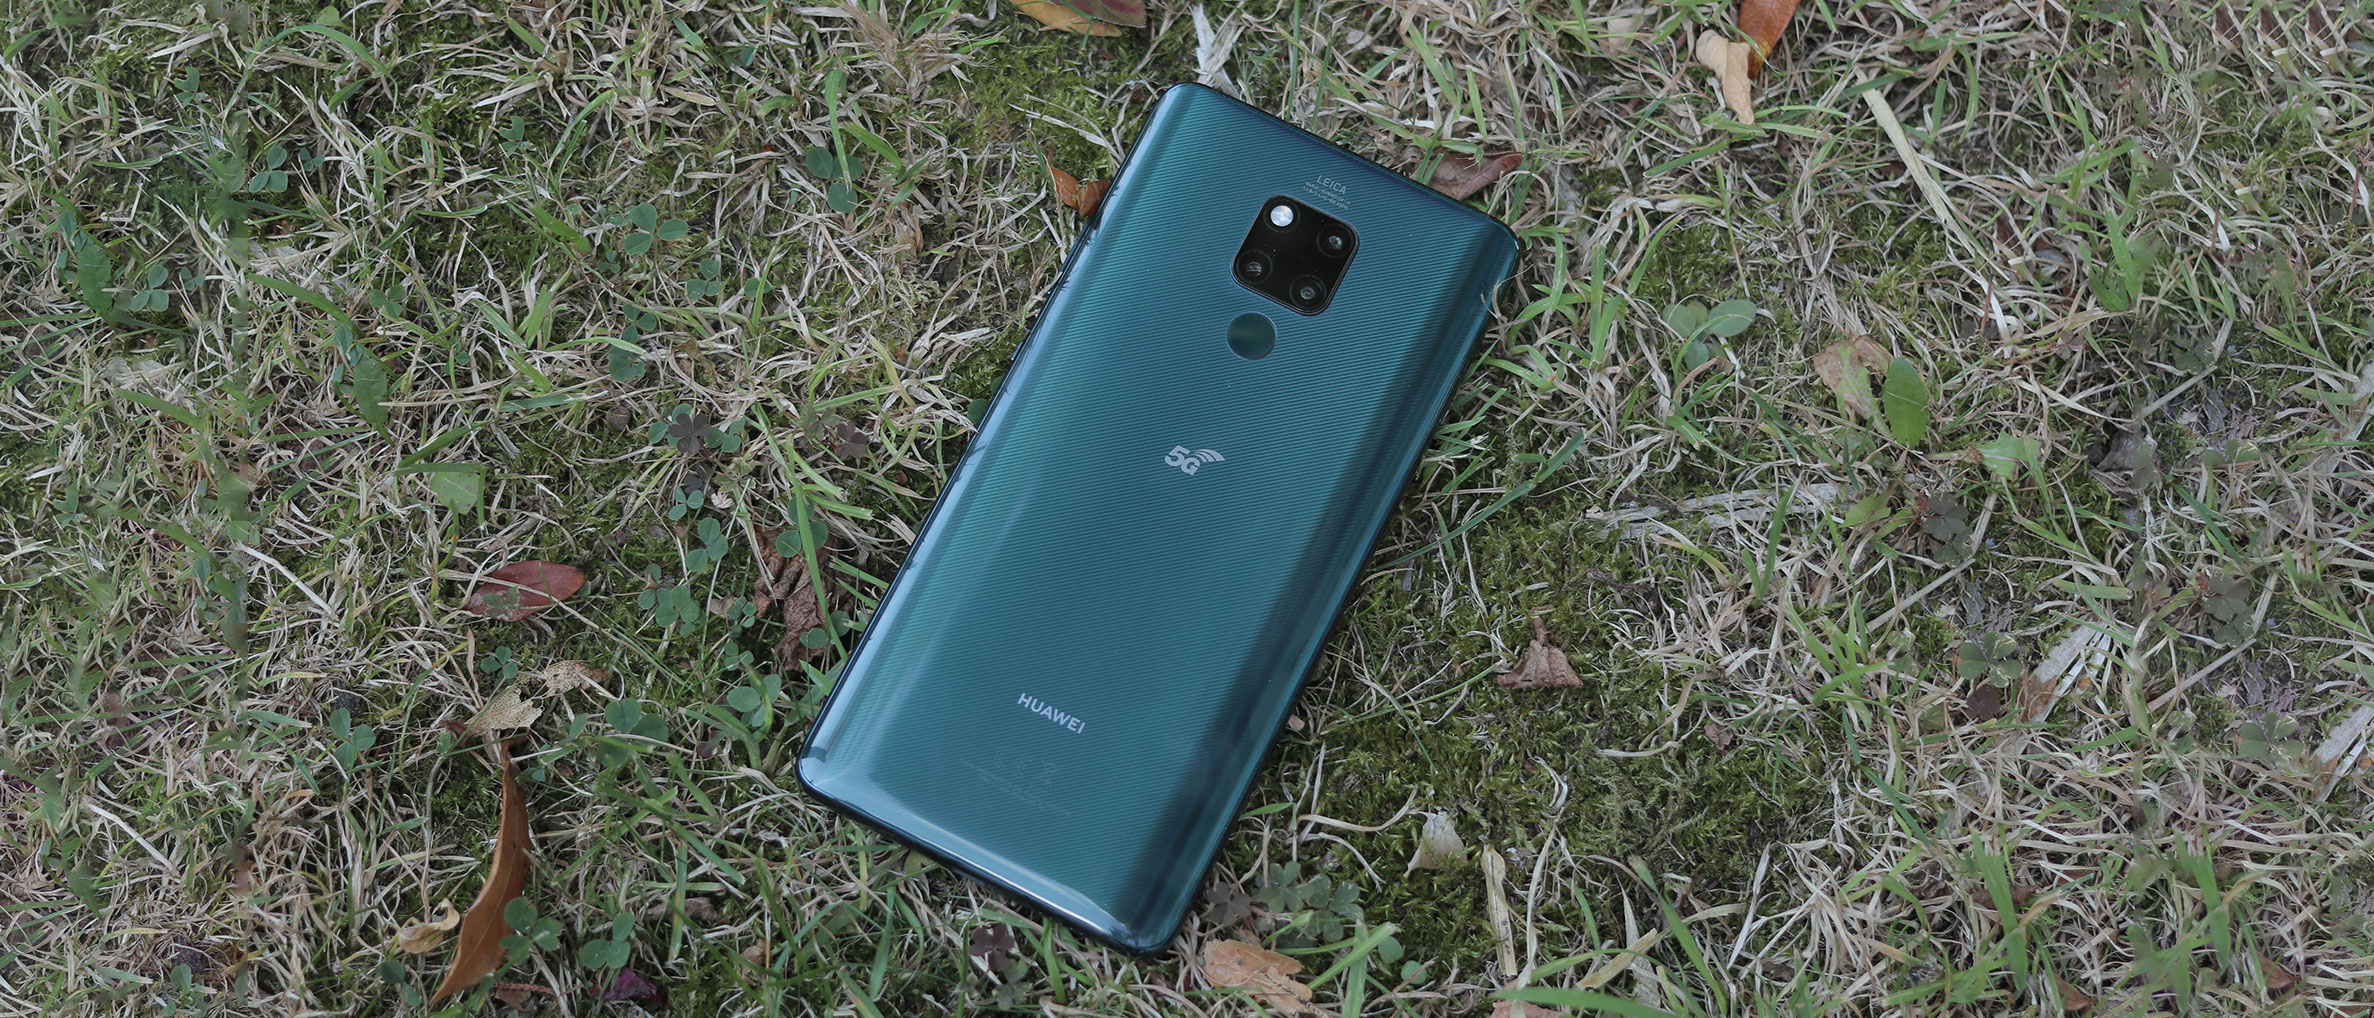 droogte Gedachte filter Anything else I should know? - Huawei Mate 20 X 5G review | TechRadar